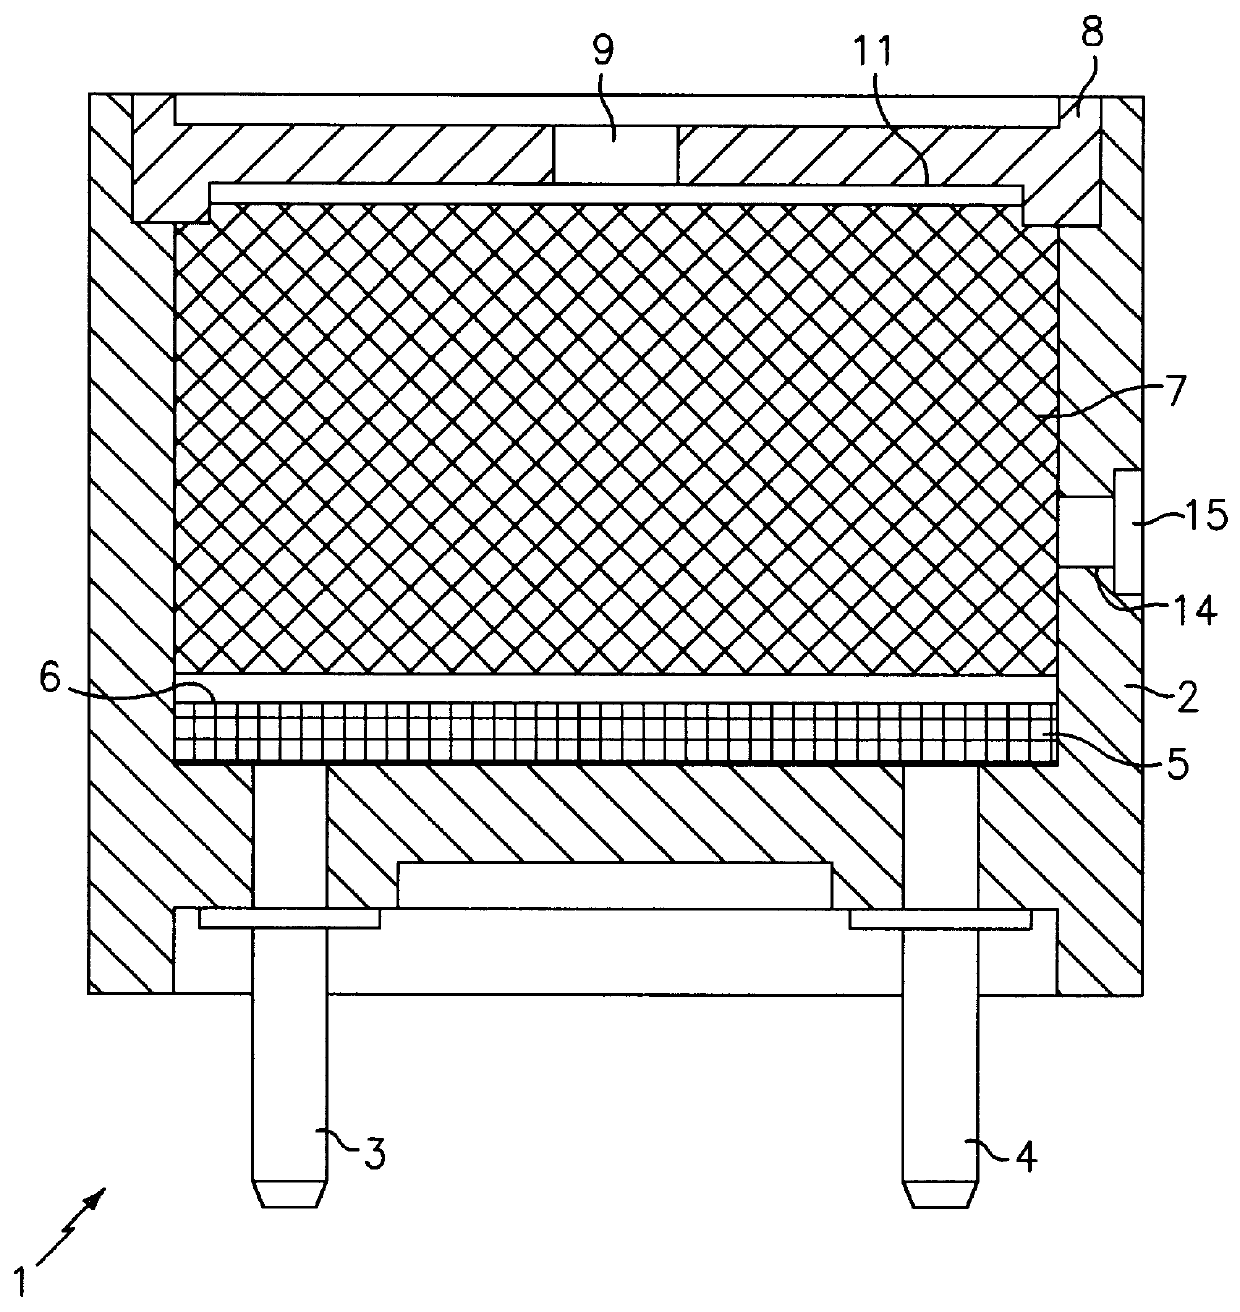 Gas detecting apparatus having condition monitoring means